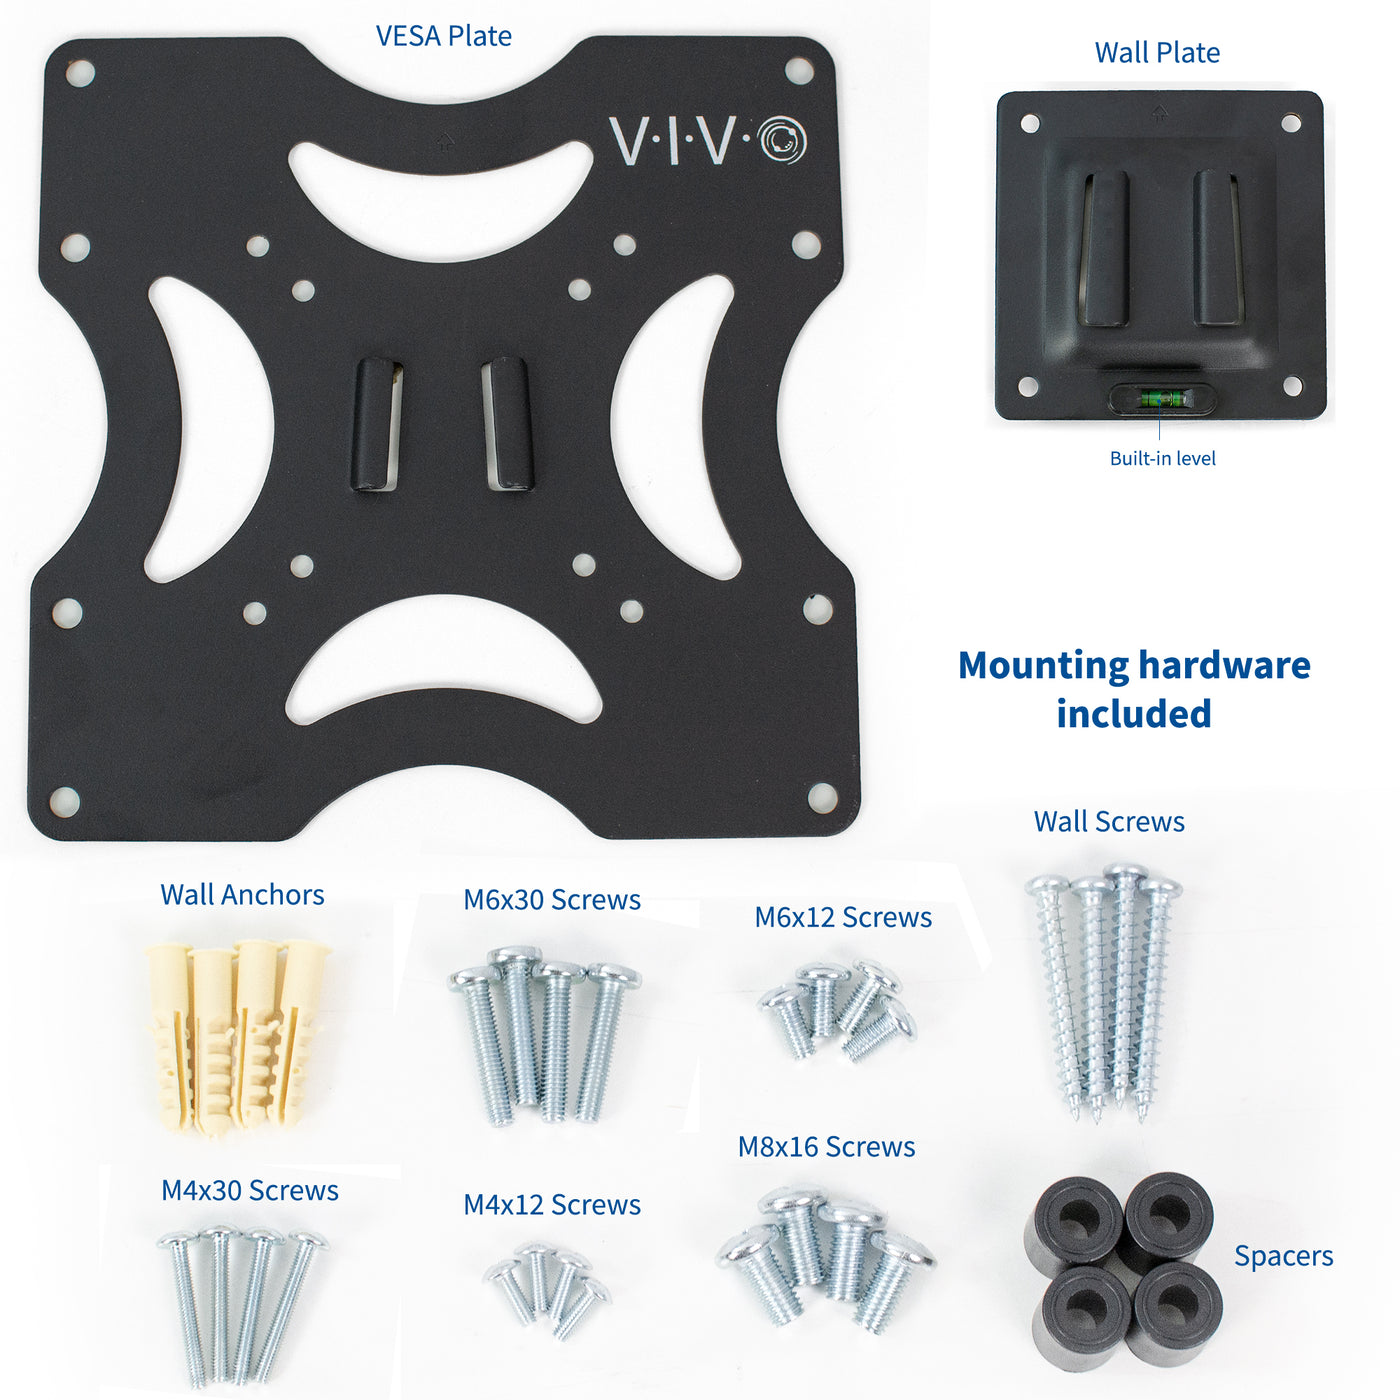 Wall mount TV VESA plate with all required hardware included.